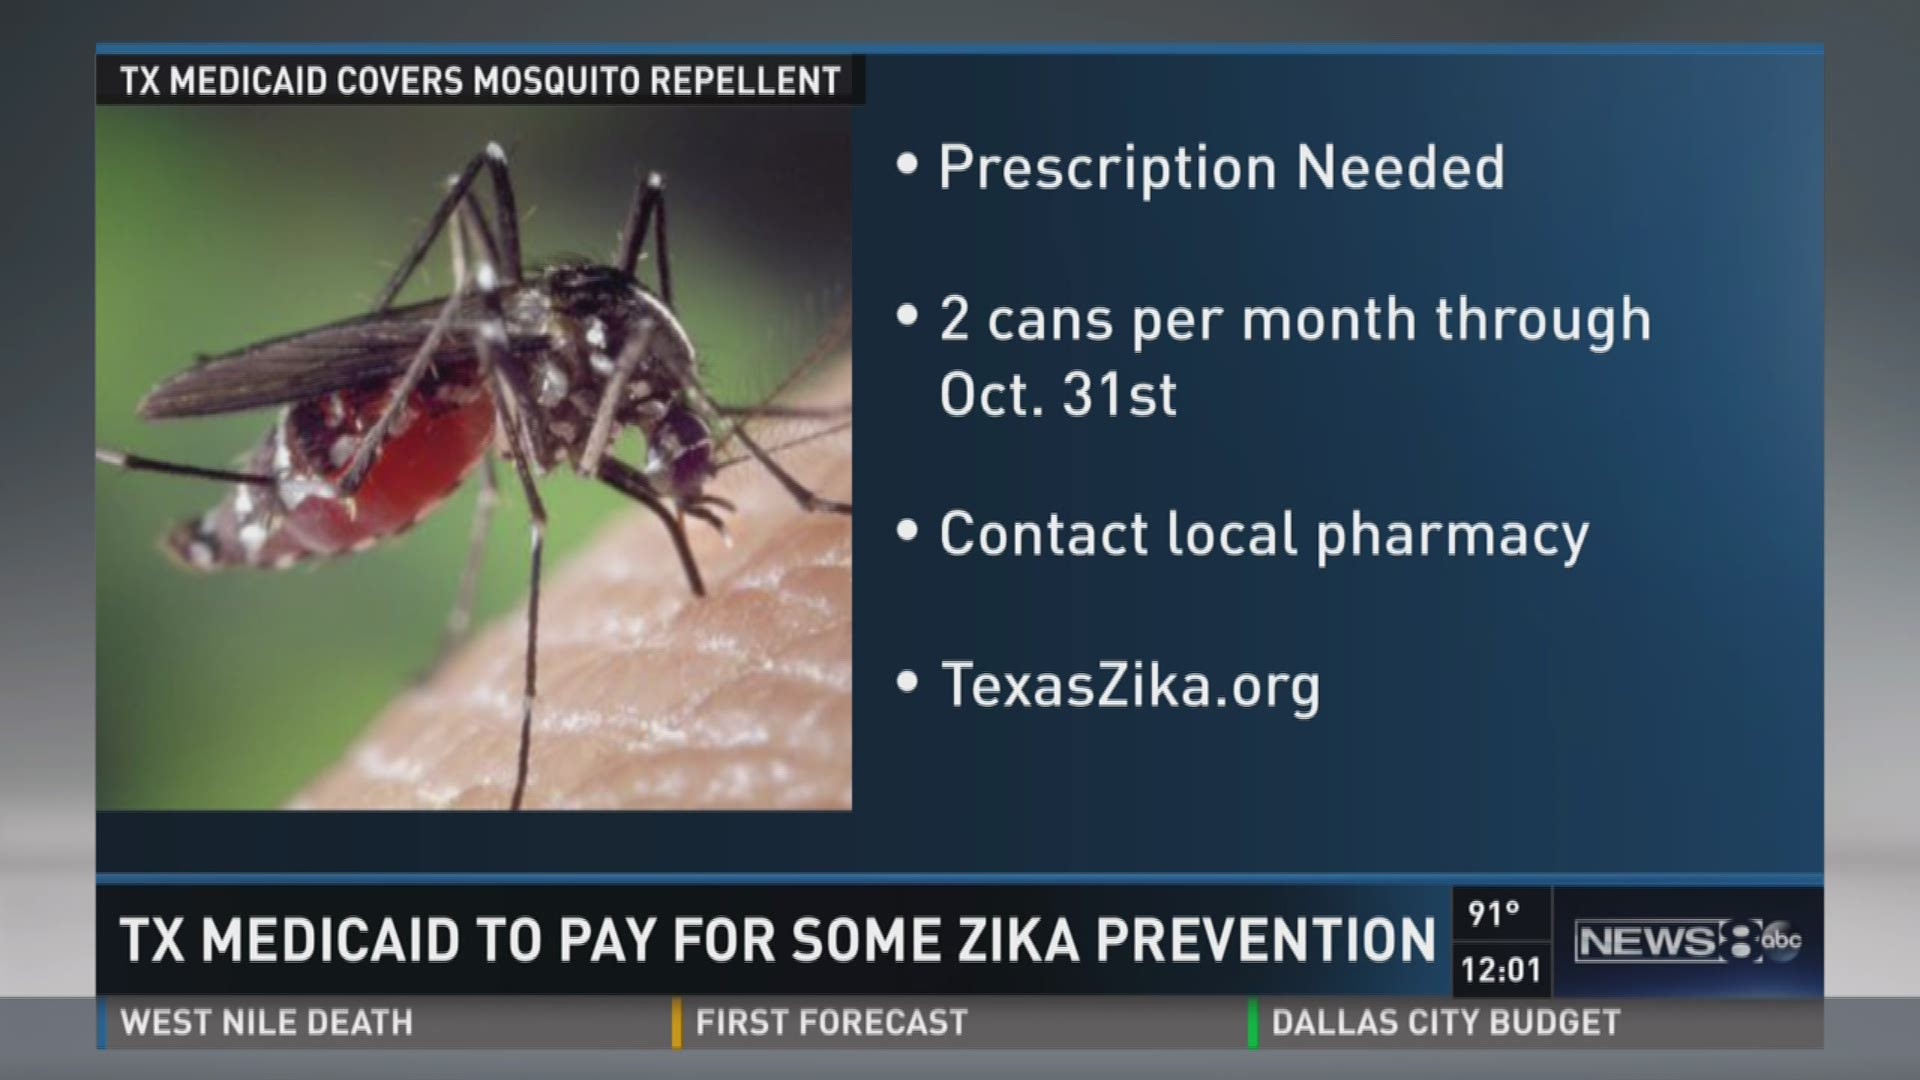 Houston-area baby's death is Zika-related